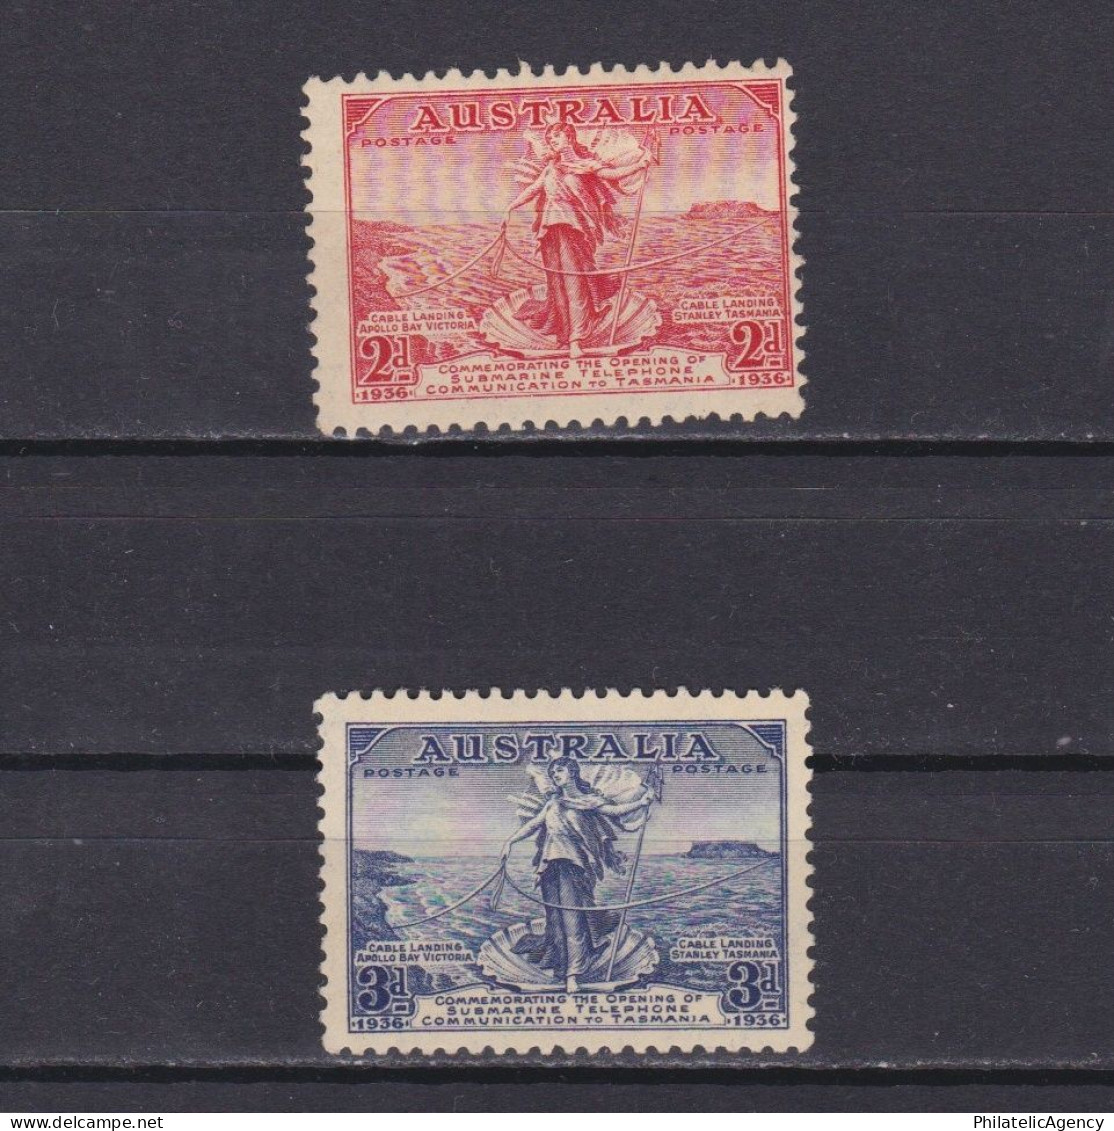 AUSTRALIA 1936, SG# 159-160, Cables Between Australia And Tasmania, MH - Mint Stamps